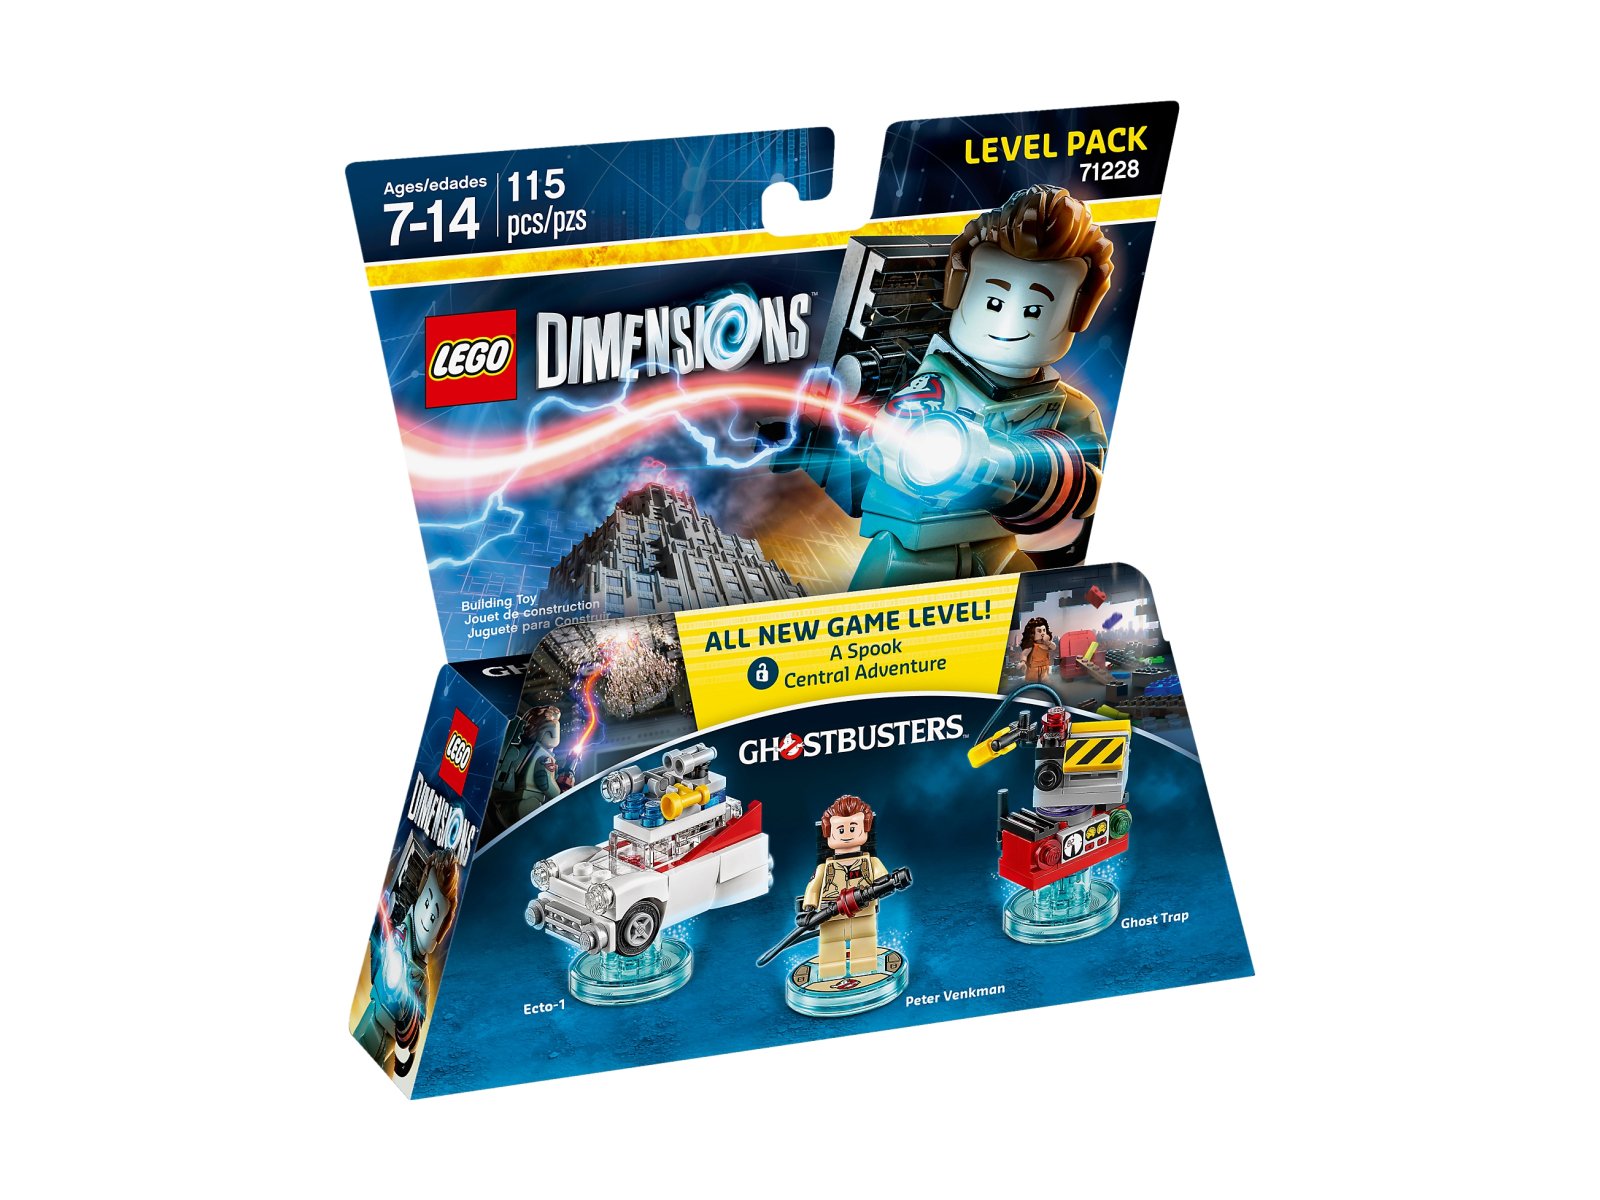  Ghostbusters Level Pack - LEGO Dimensions : Toys & Games